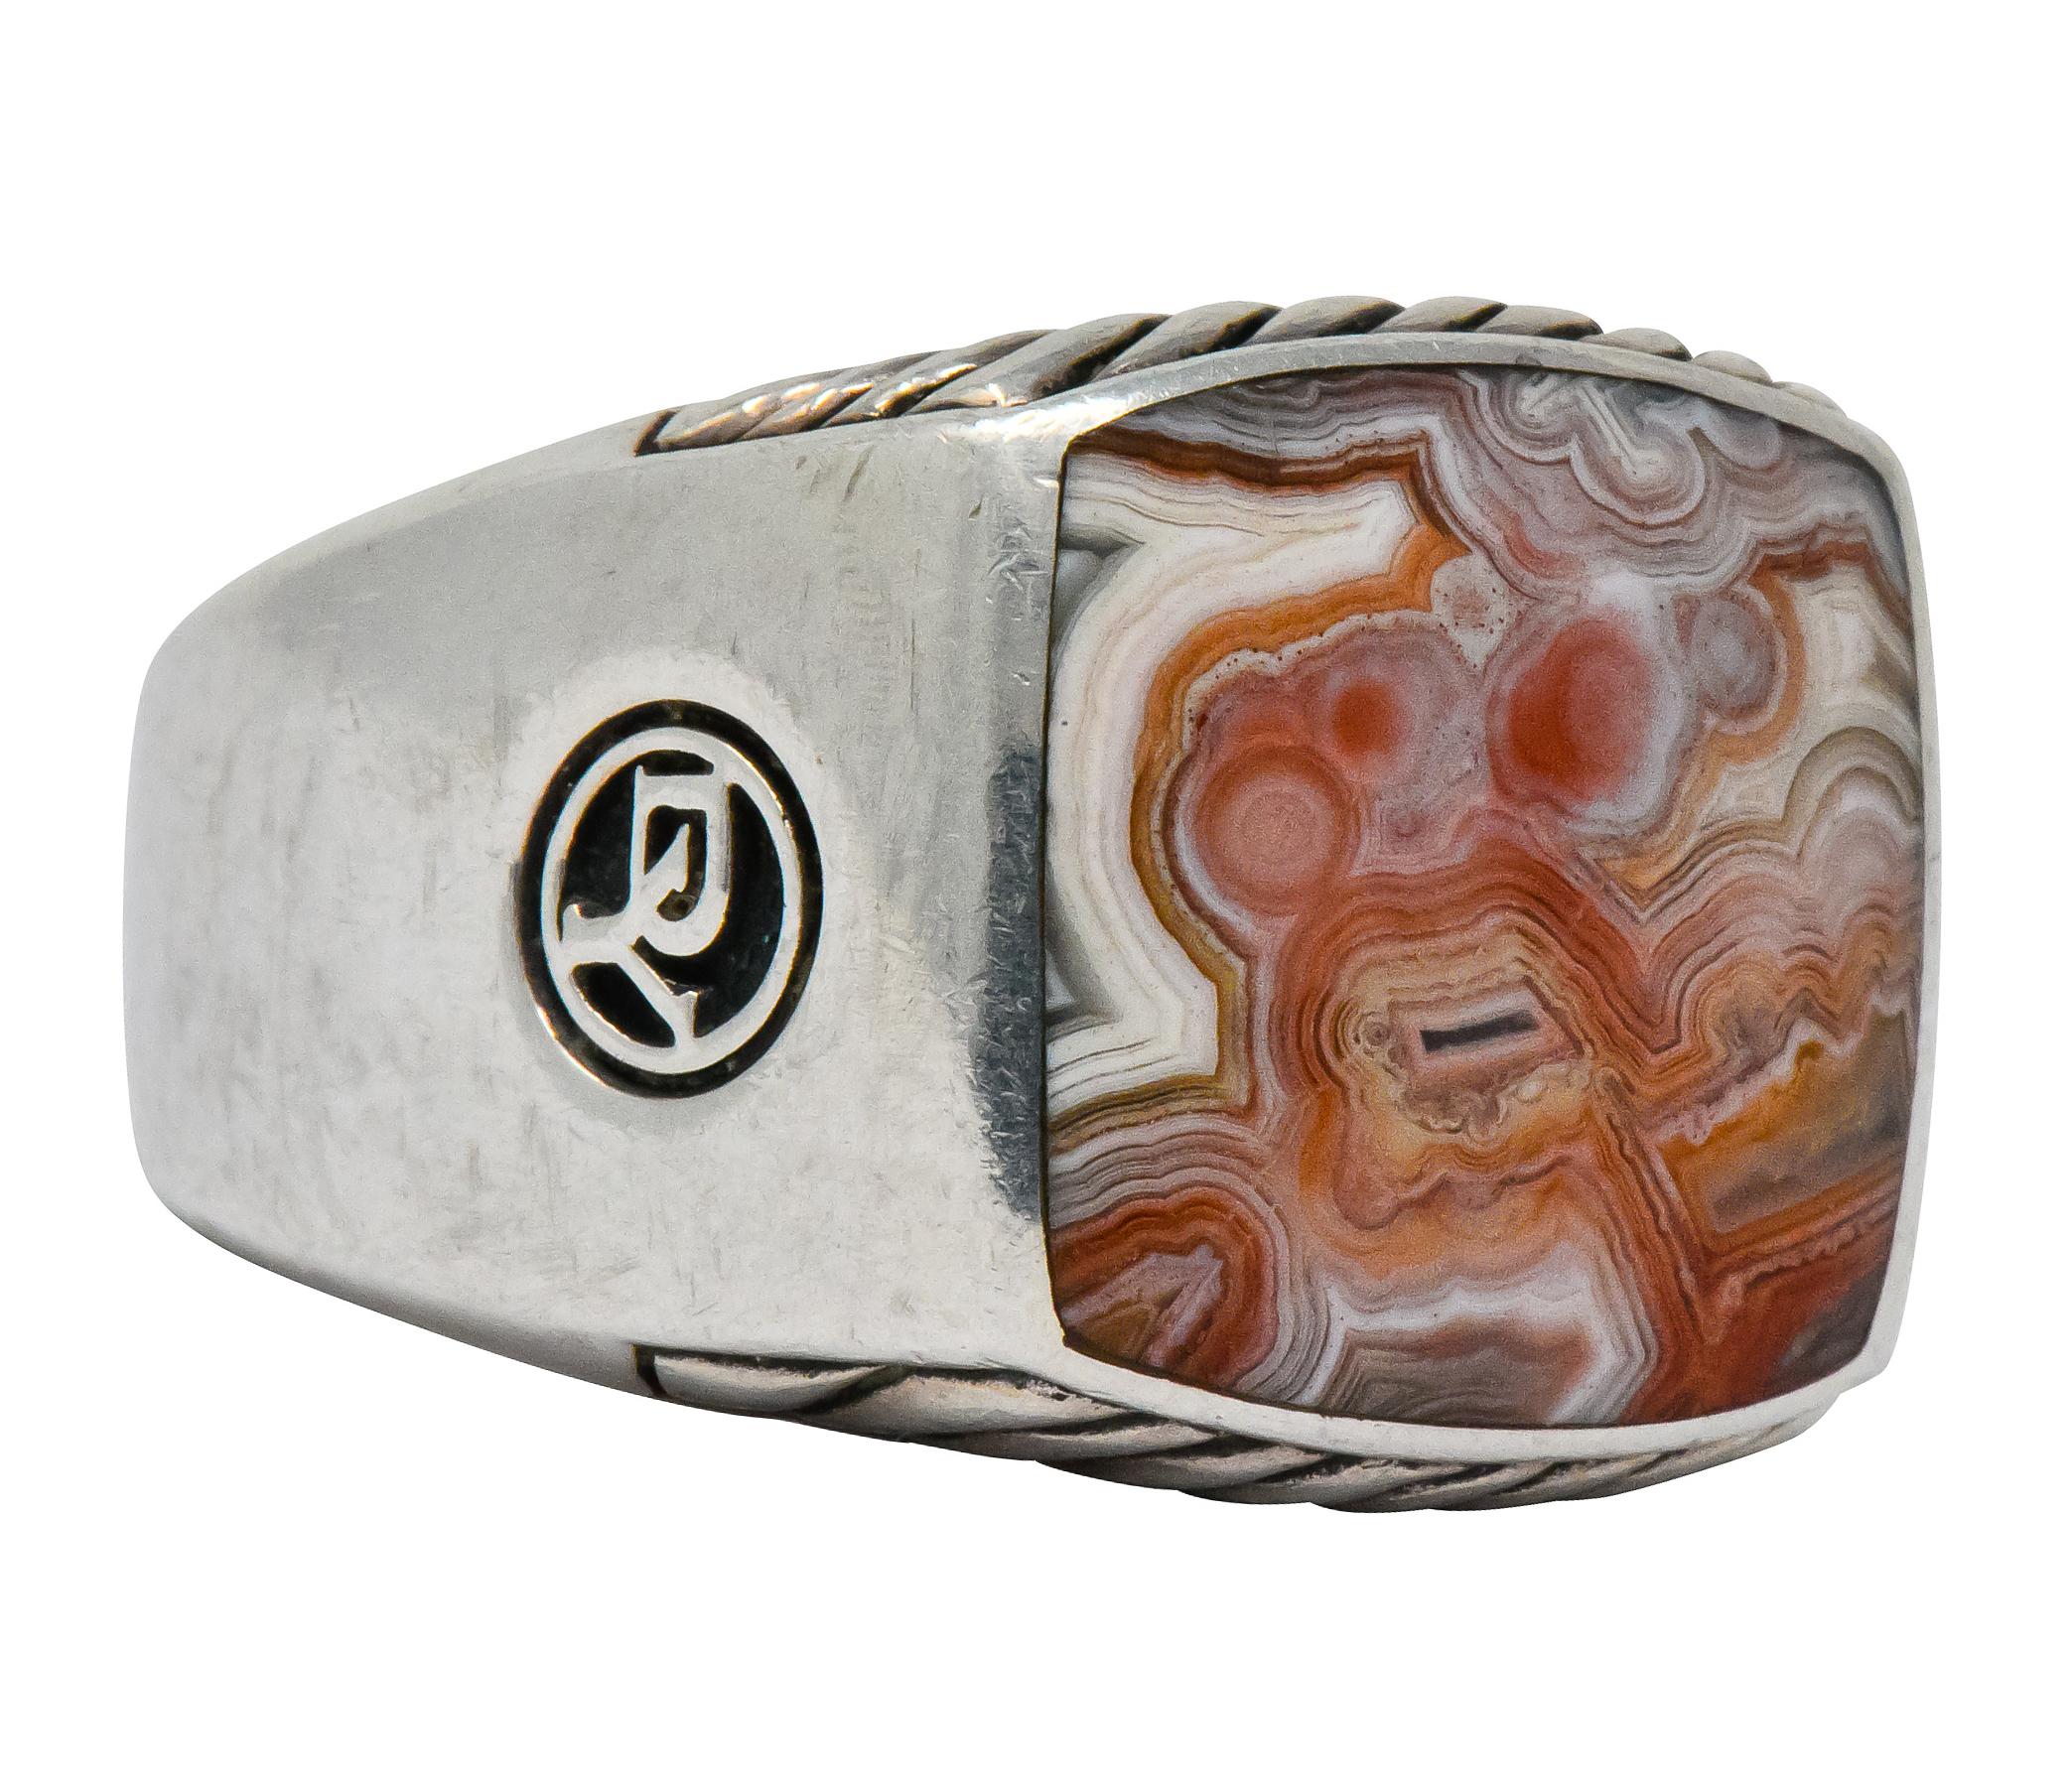 Centering an inlaid square slice of jasper, opaque with pink, red, and brown banding and good polish

Accompanied by ribbed silver pattern on profile faces

From David Yurman's Exotic Stone collection

Silver maker's mark on shoulder

Stamped 925